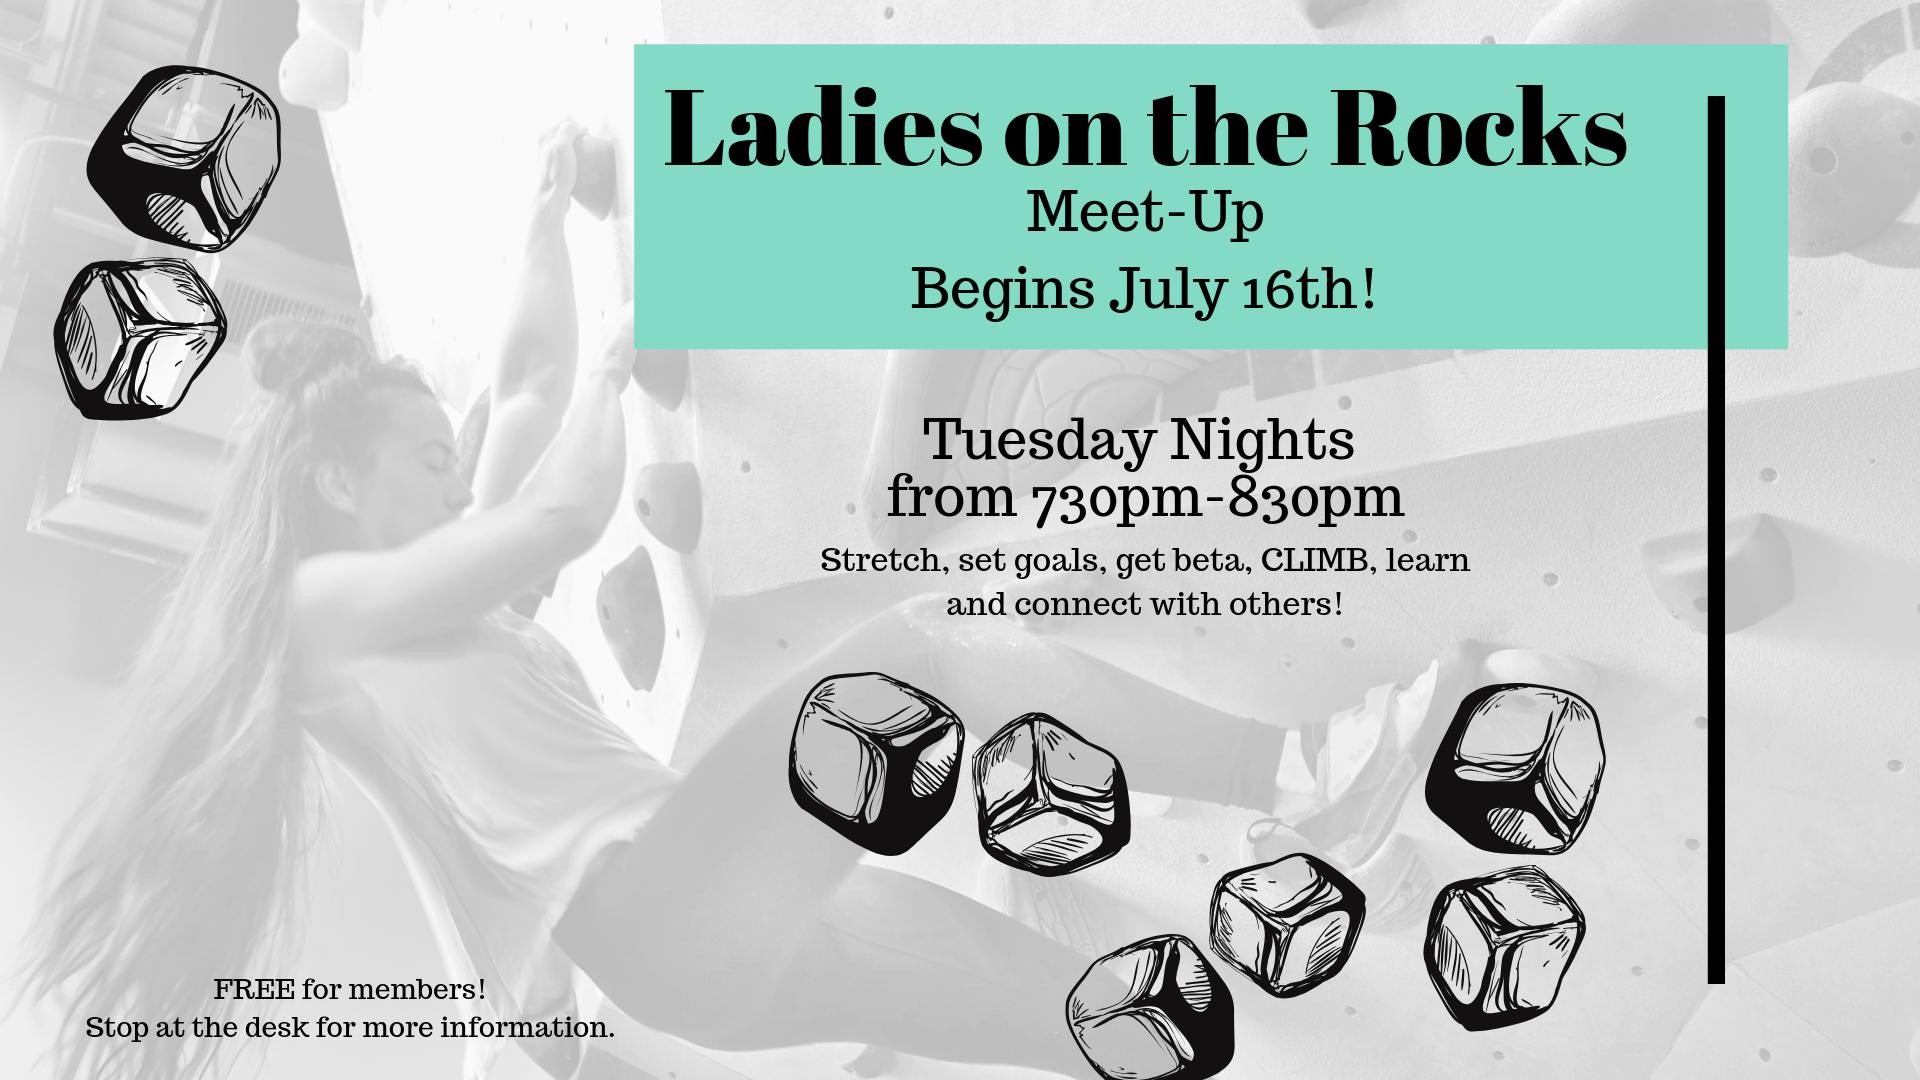 Women's Climbing Night at Central Rock Gym Rochester